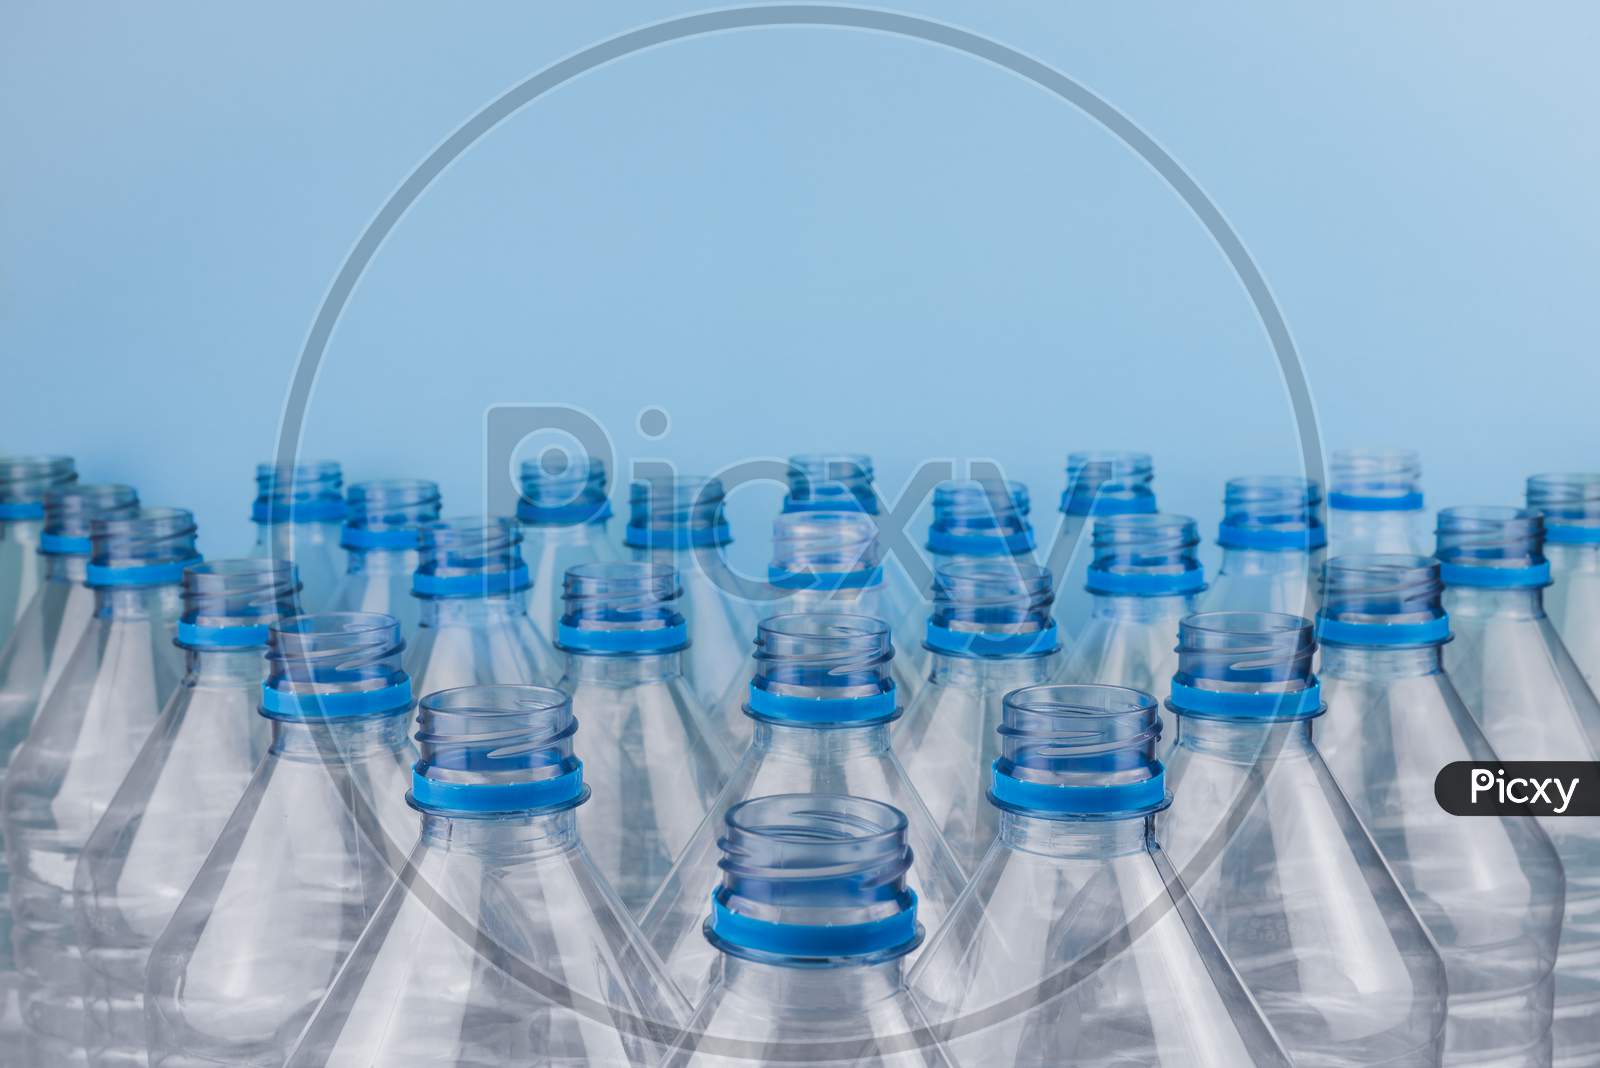 Empty Clear Plastic Bottles Without Caps Stacked On A Blue Background. Recycling And Environment Concept.